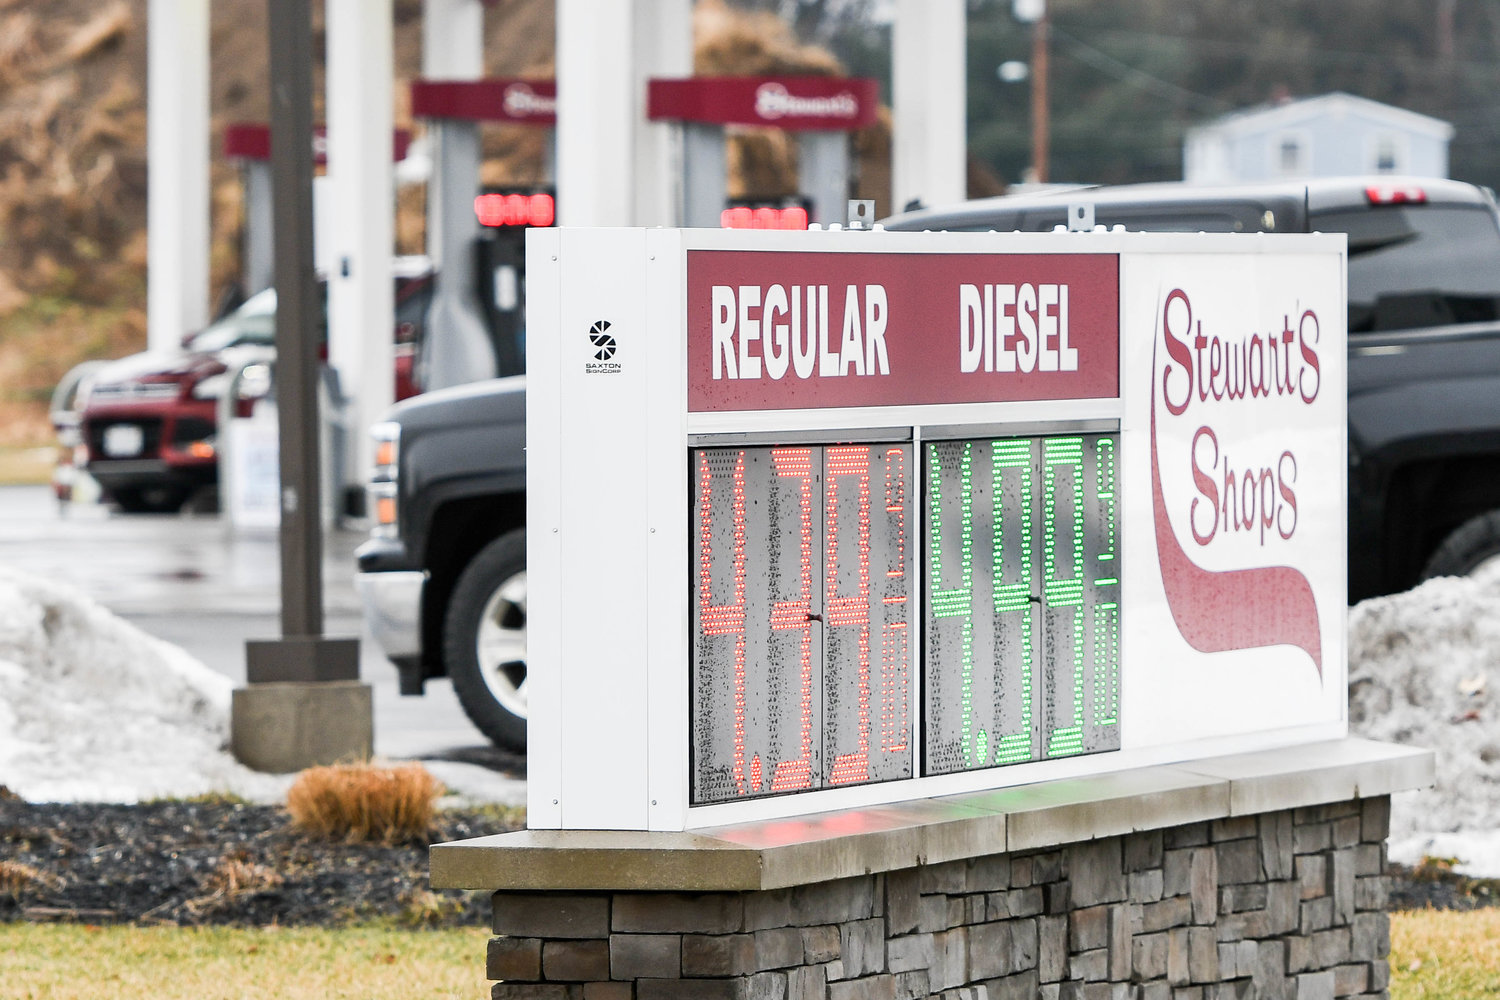 BAD NEWS AT PUMP — Gas prices are listed outside of Stewart’s Shops on Floyd Avenue in Rome. Prices are now well over $4 per gallon across the state — and industry experts warn the increases may eventually top $5.